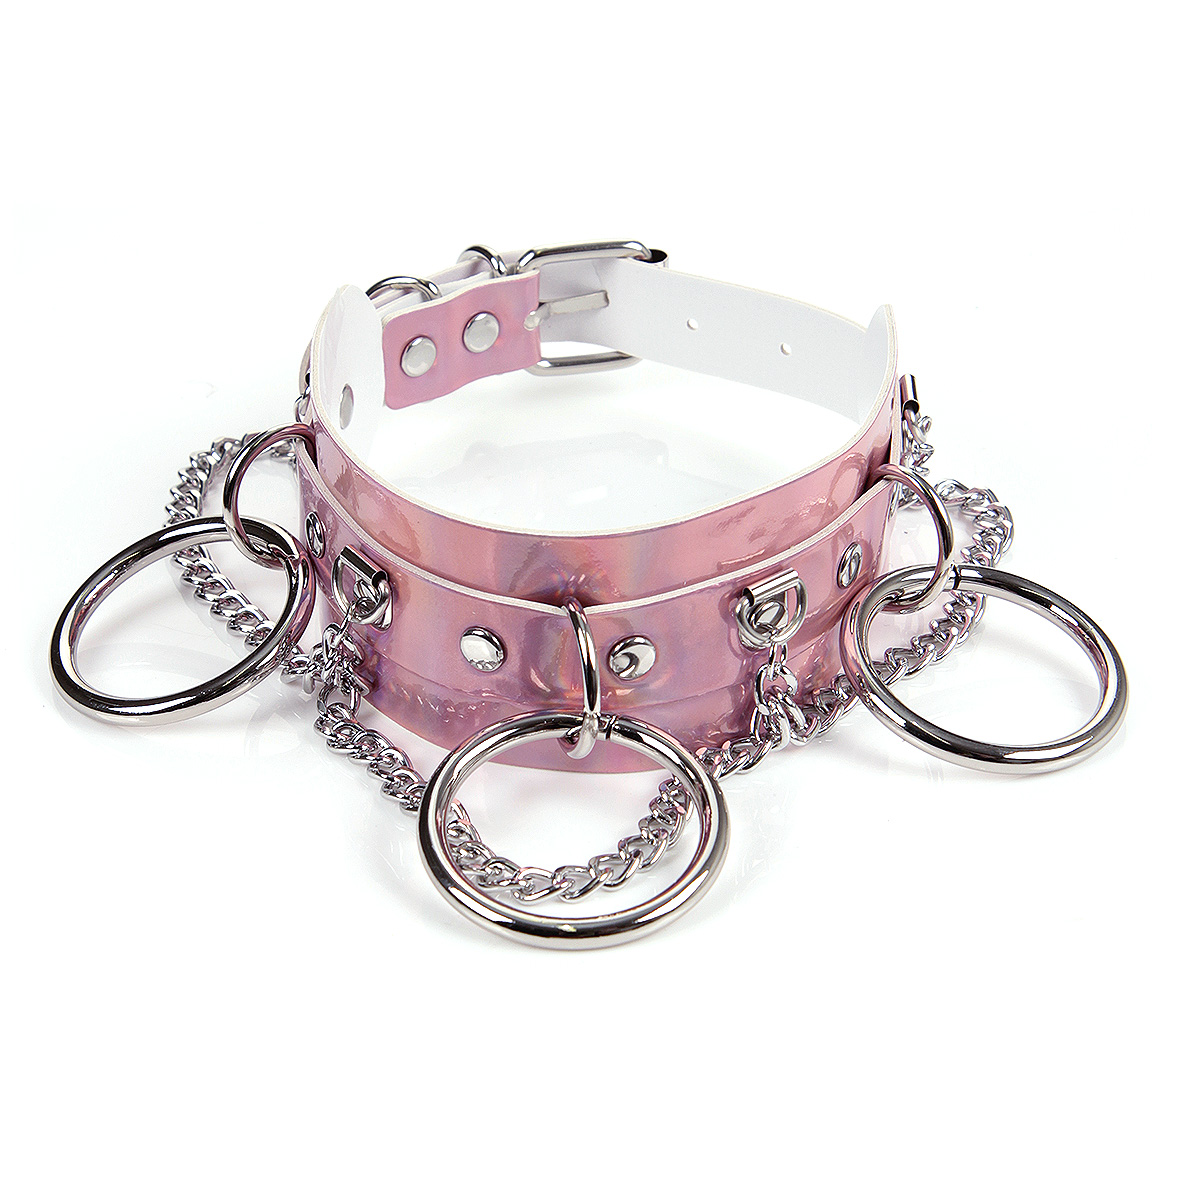 Pink Wide Hologram Choker with Rings and Chain - Cybershop Australia